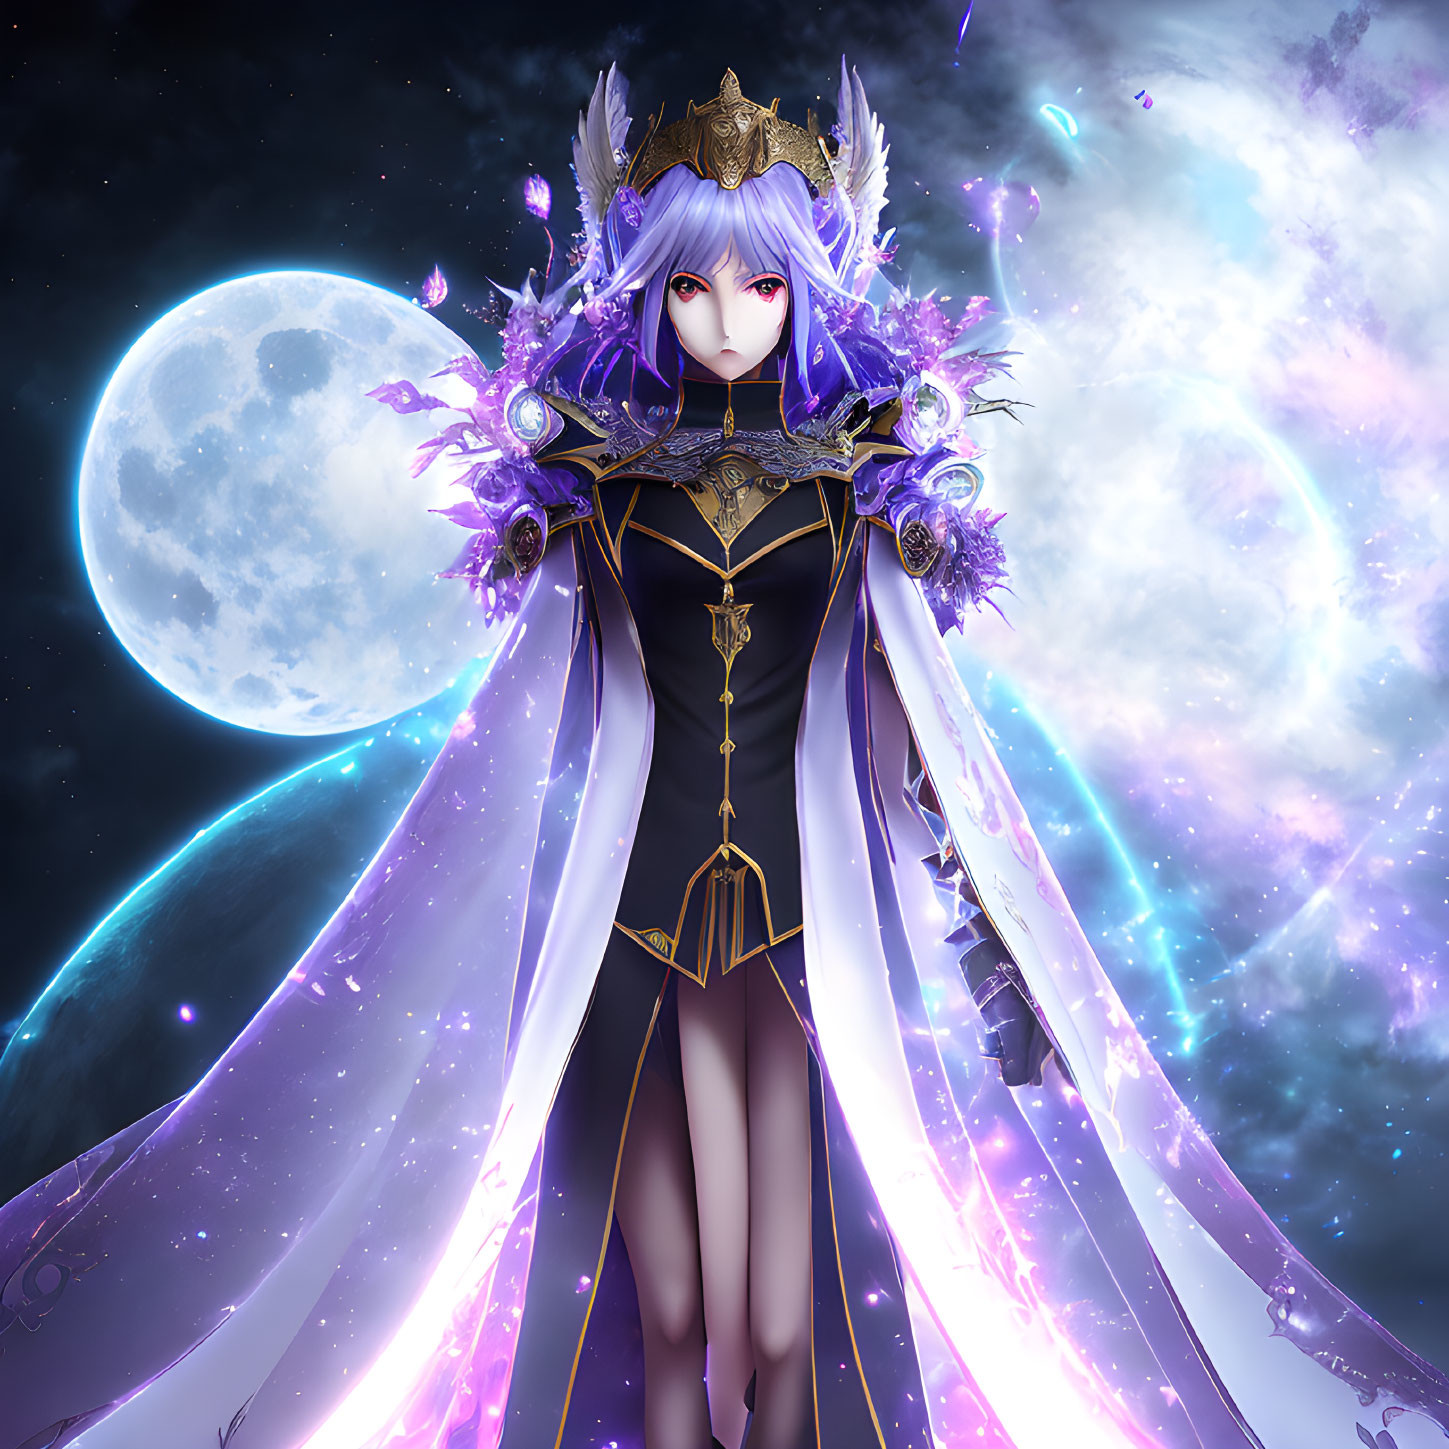 Female character with purple hair, regal crown, and dark attire in mystical setting